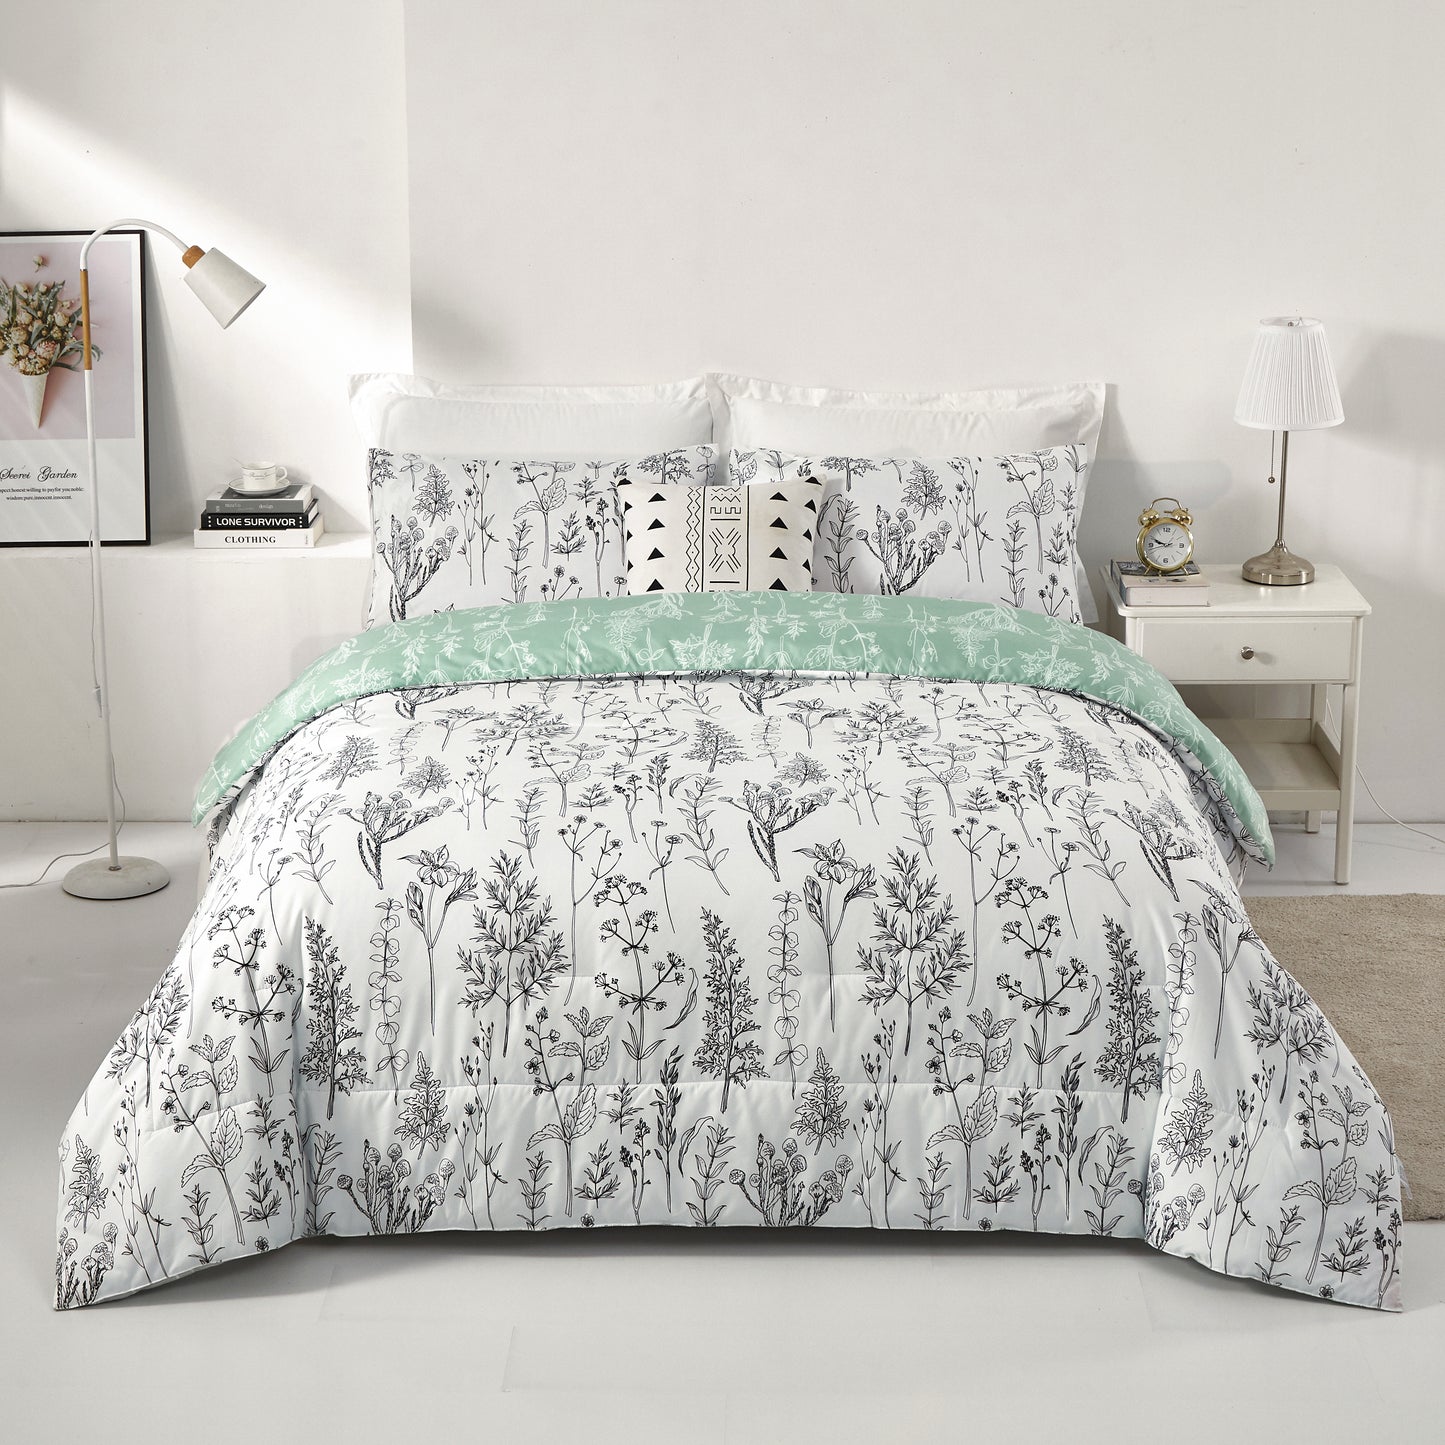 Green and White Reversible Floral Sage Green Comforter Set 3 Pieces Flowers Plants Bed Set with 2 Pillow Shams